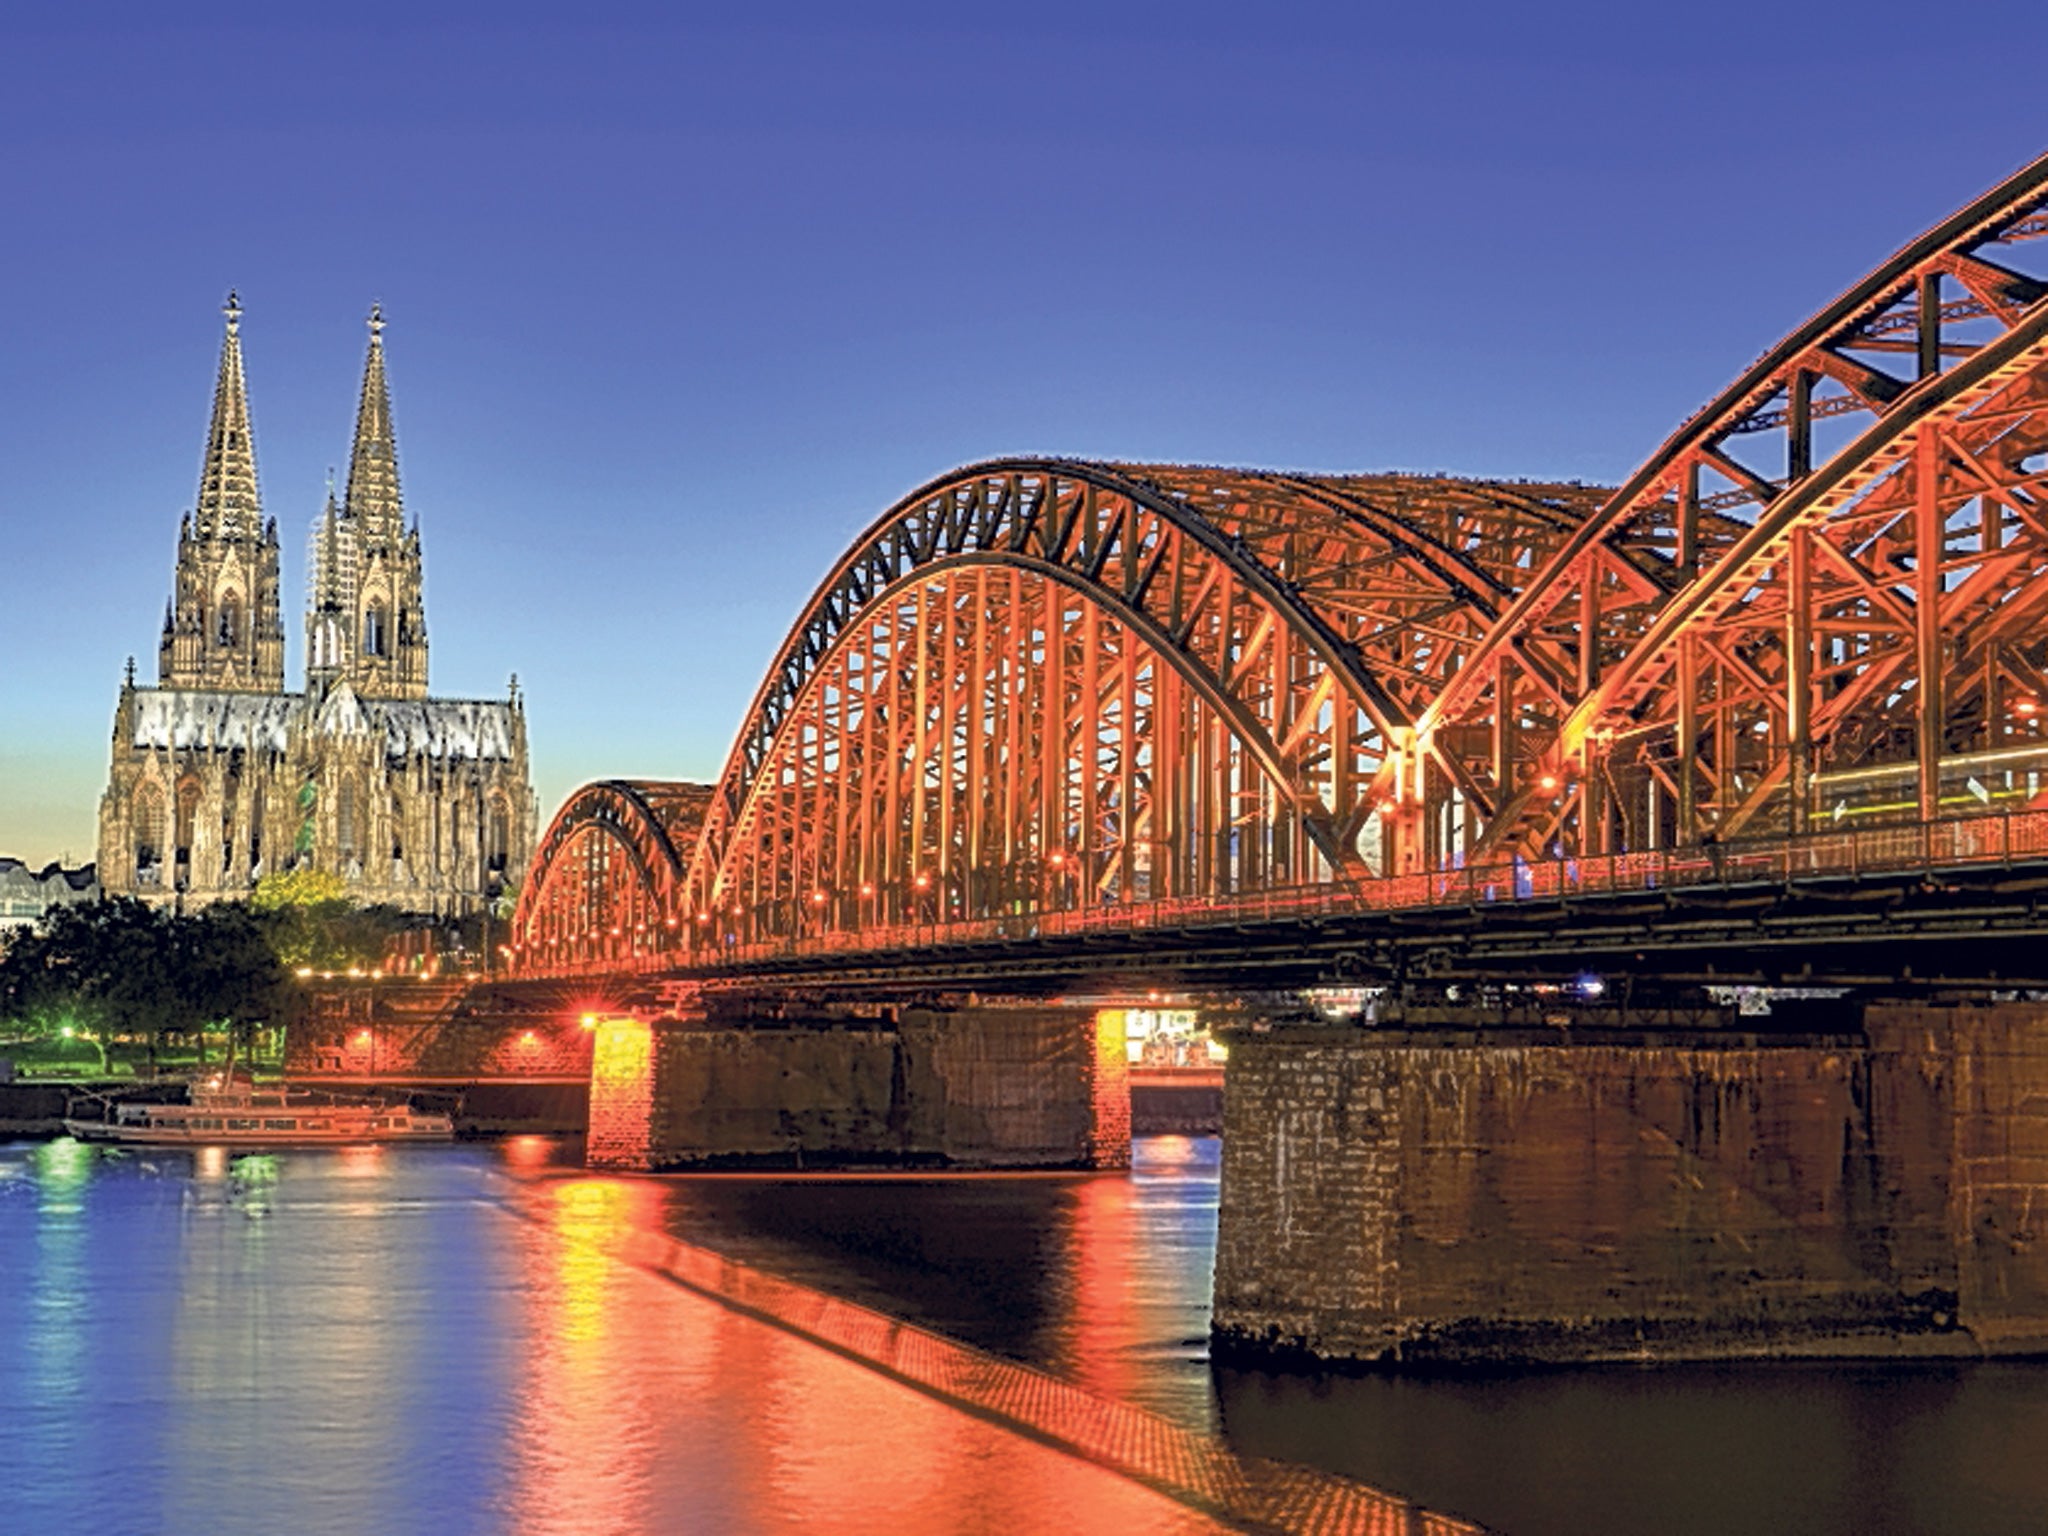 Why settle for one city, says Simon who suggests using the Rhine as a base to explore Dusseldorf, Cologne, pictured, and Bonn